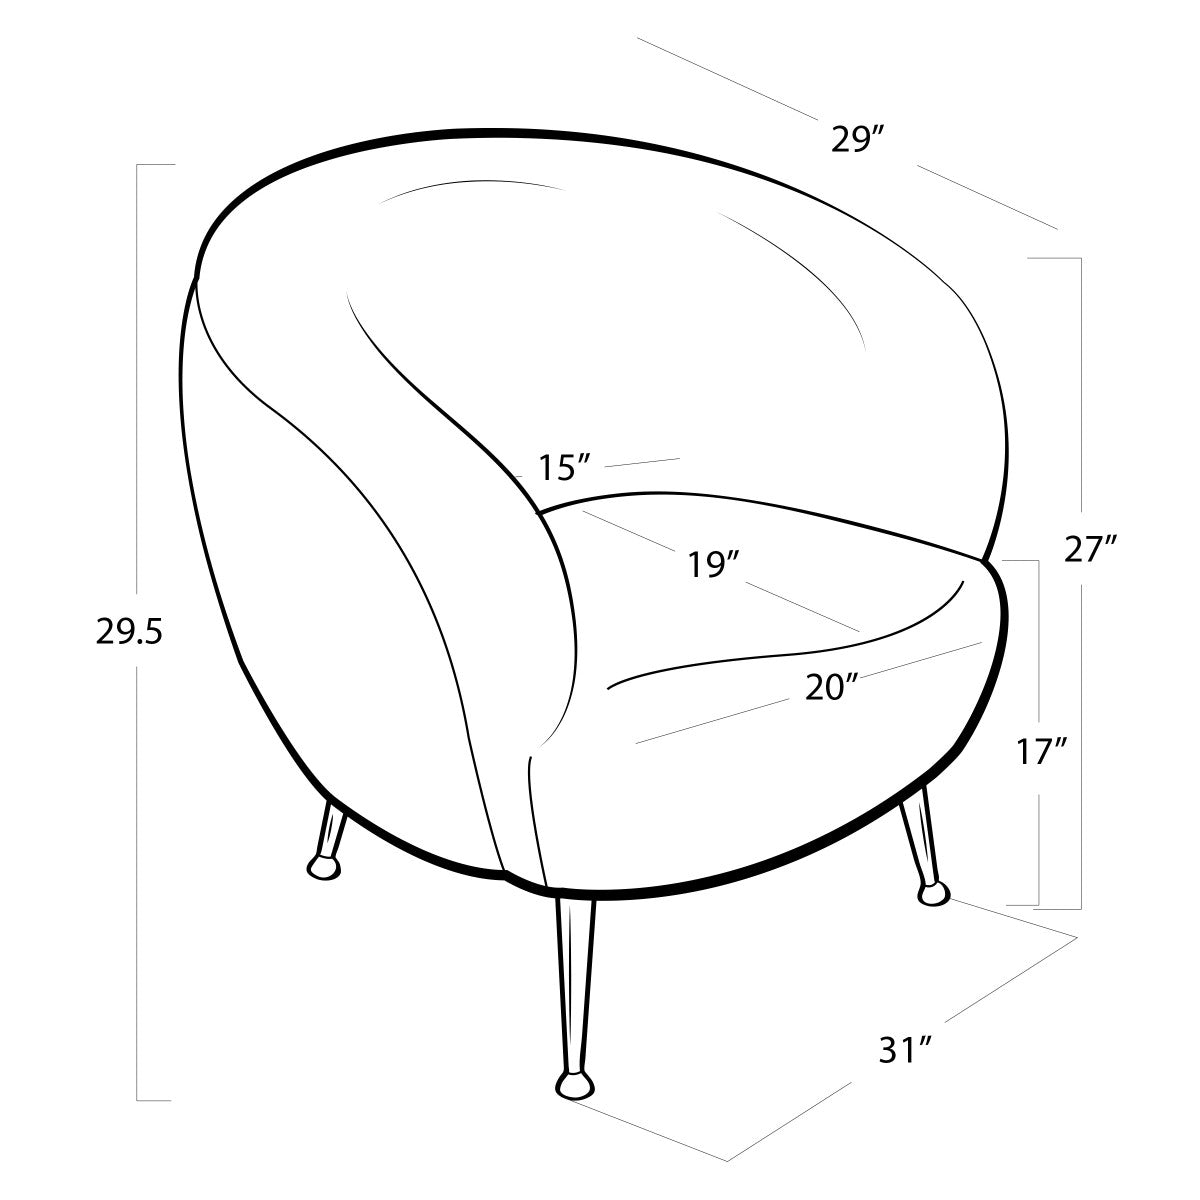 dimensions of chair